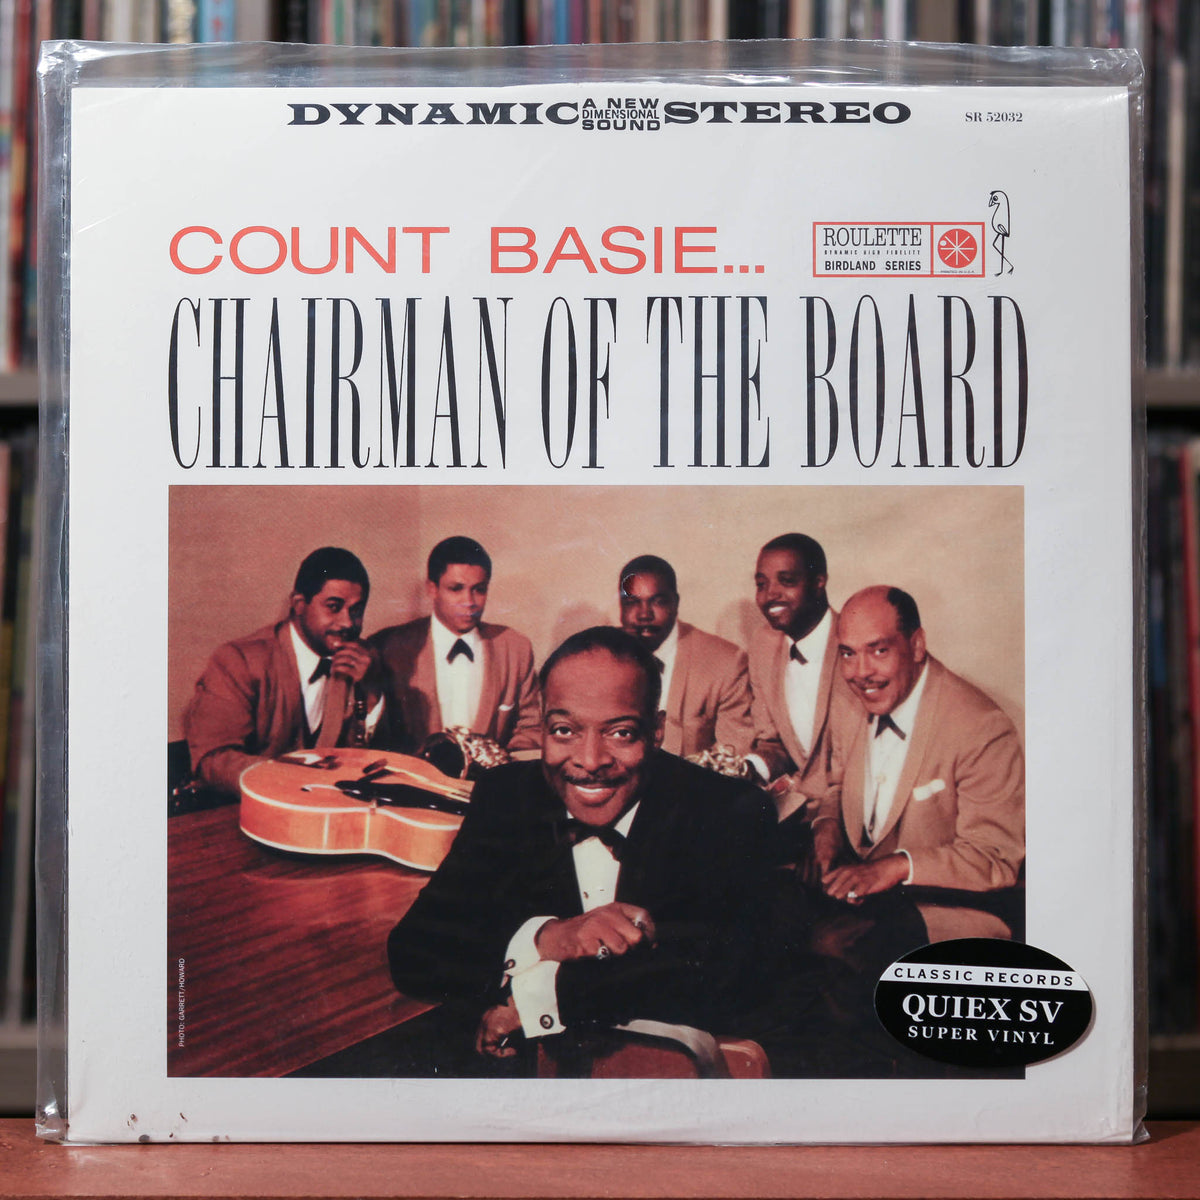 Count Basie - Chairman Of The Board - QUIEX - 1980's Classic Records, SEALED